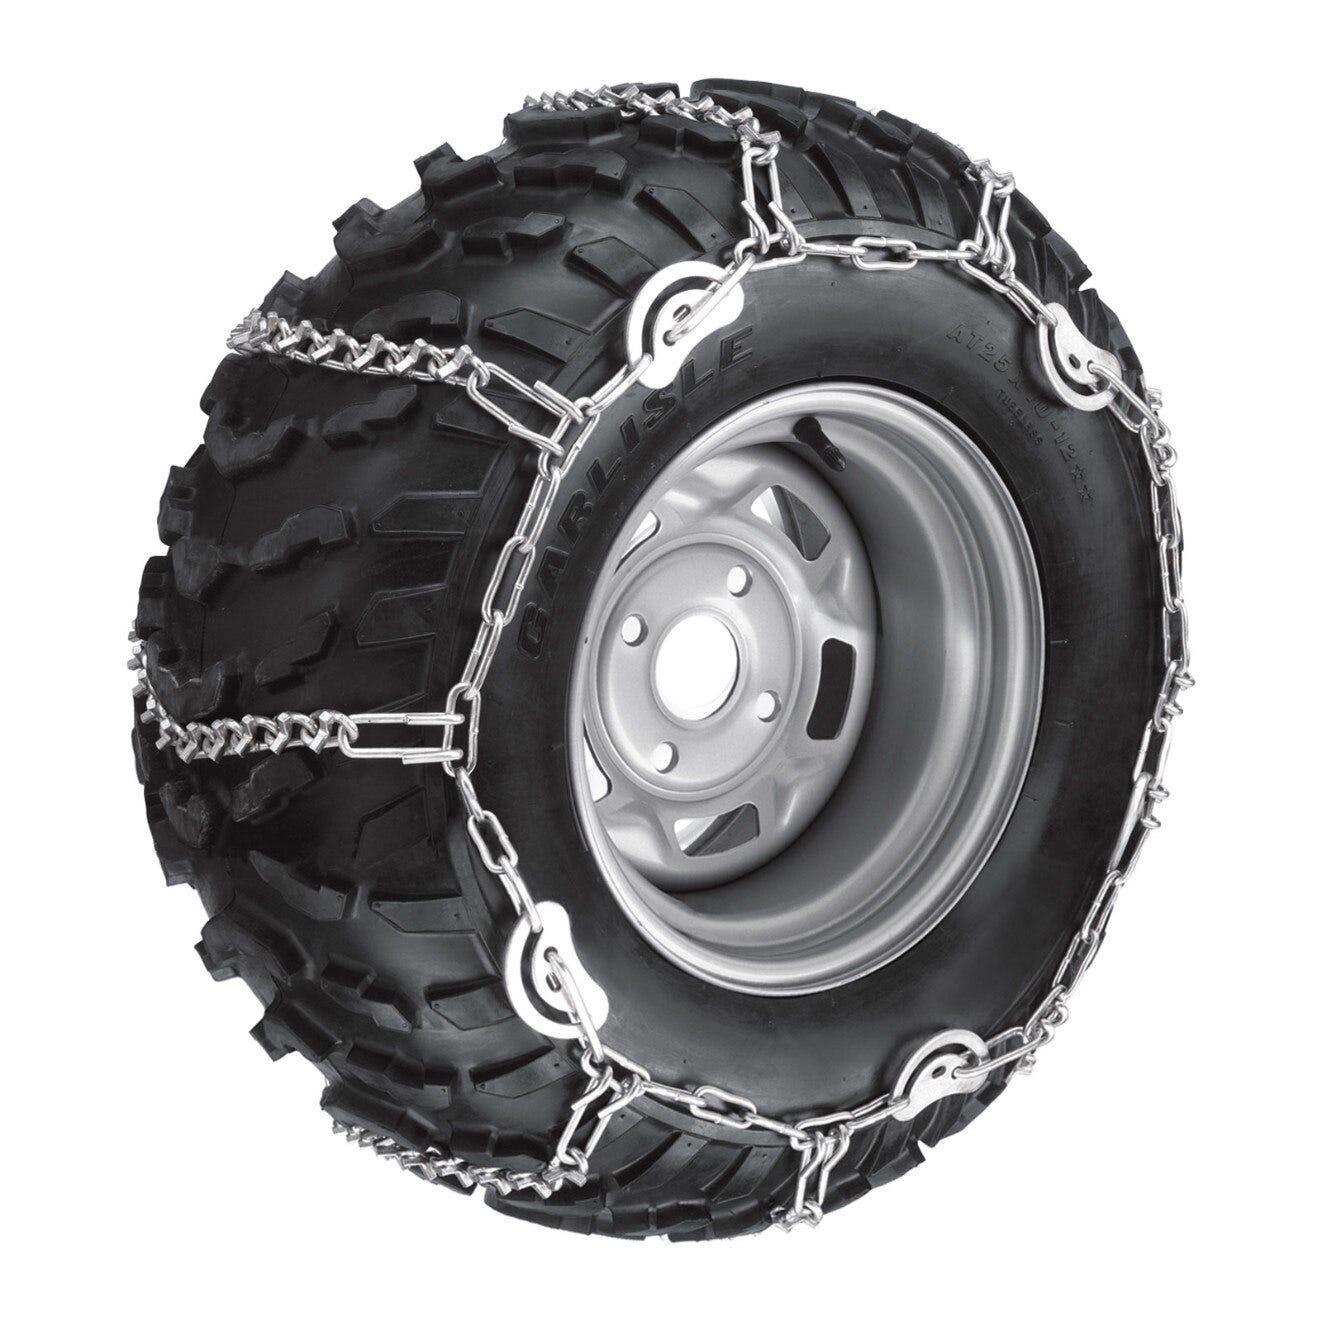 Rear Tire Chains - Factory Recreation